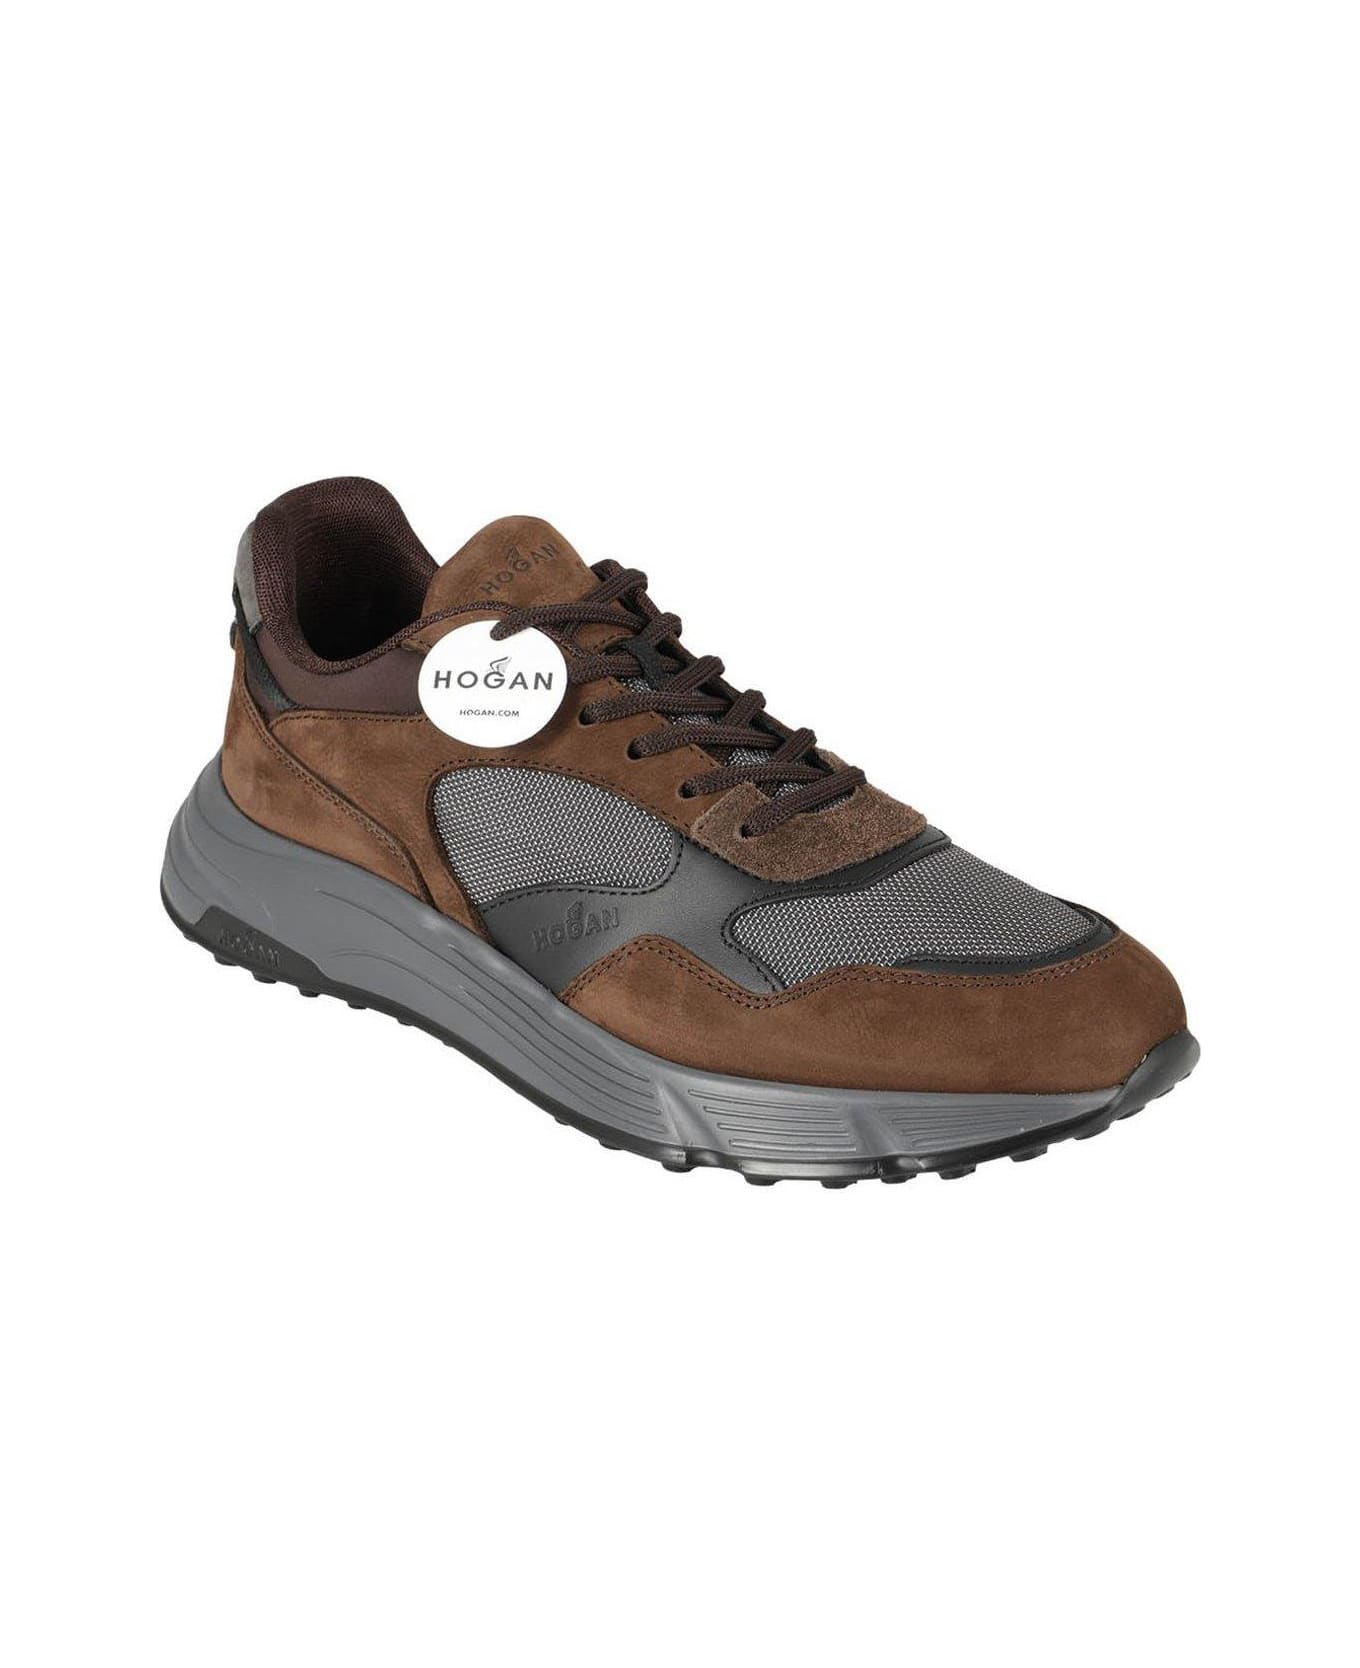 Hogan Hyperlight Panelled Lace-up Sneakers - Brown